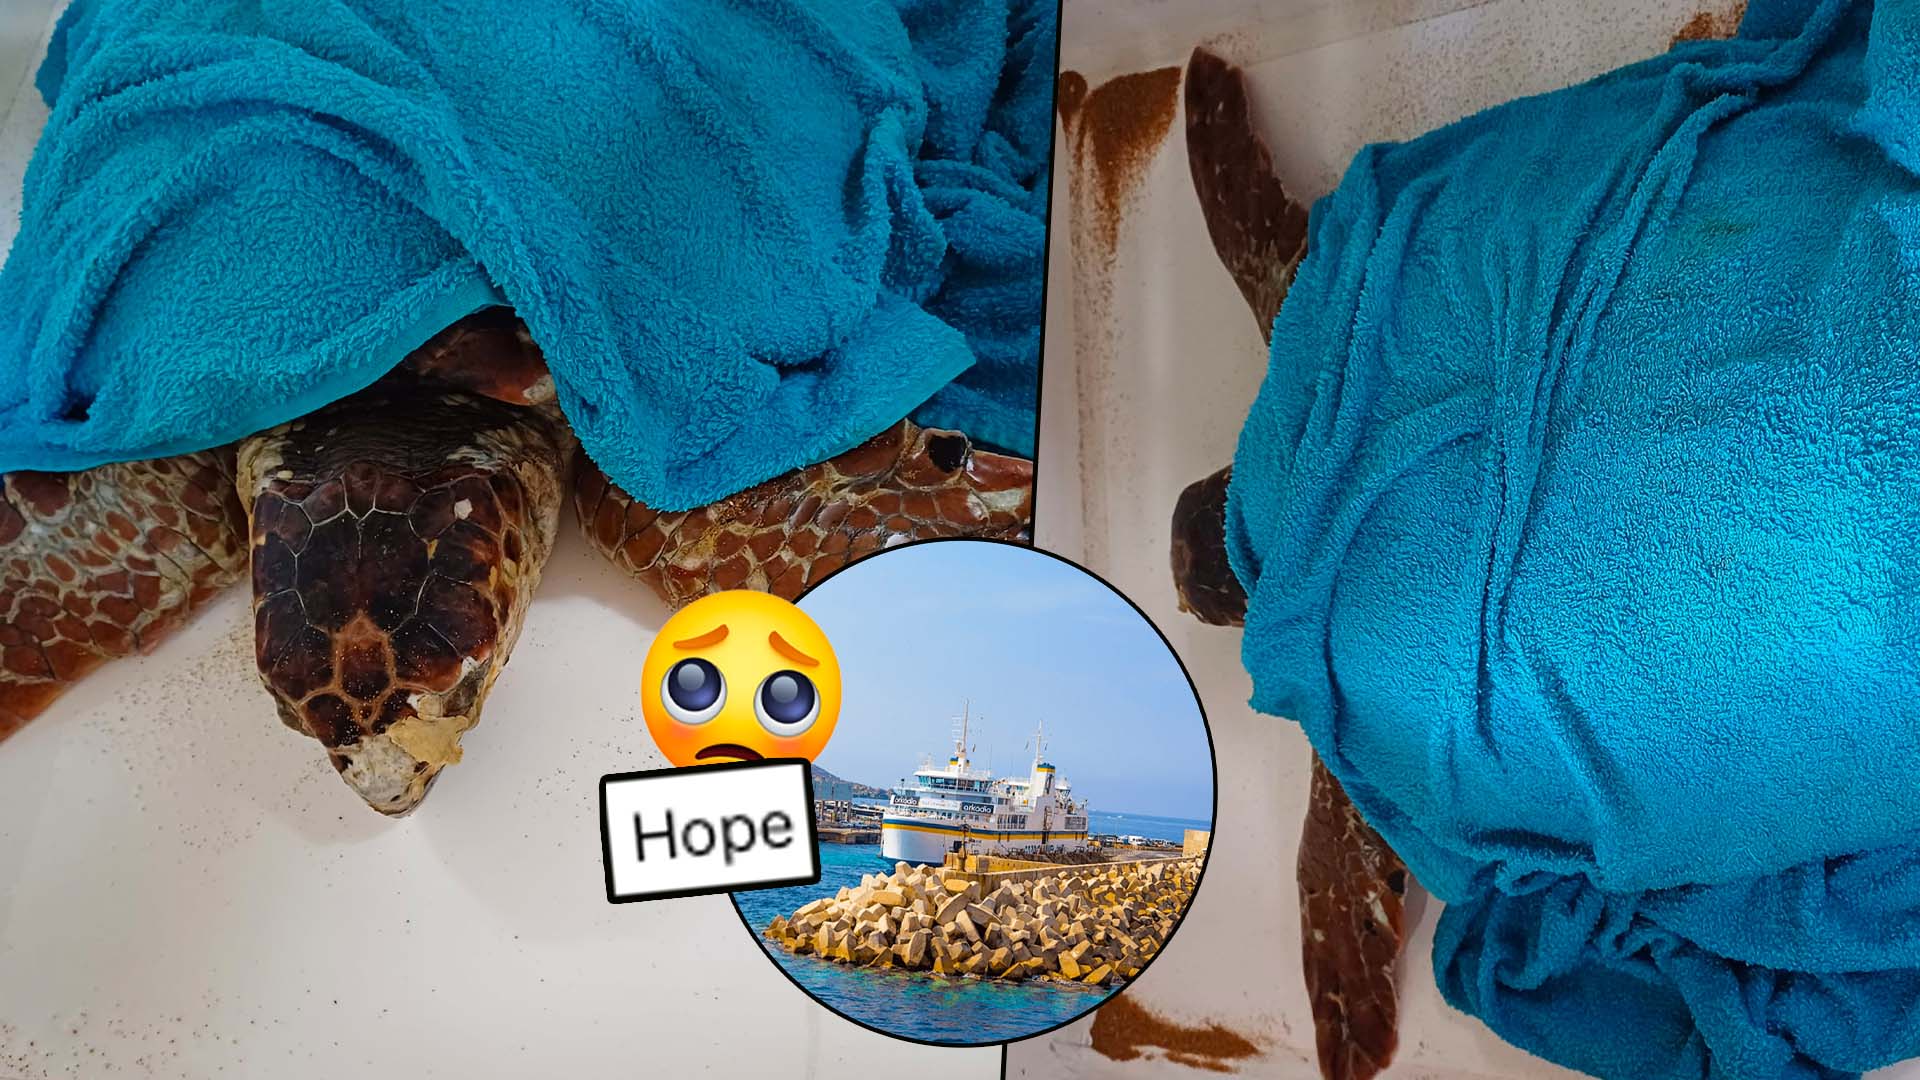 Injured Turtle Rescued By Family, Activists & Gozo Channel Staff